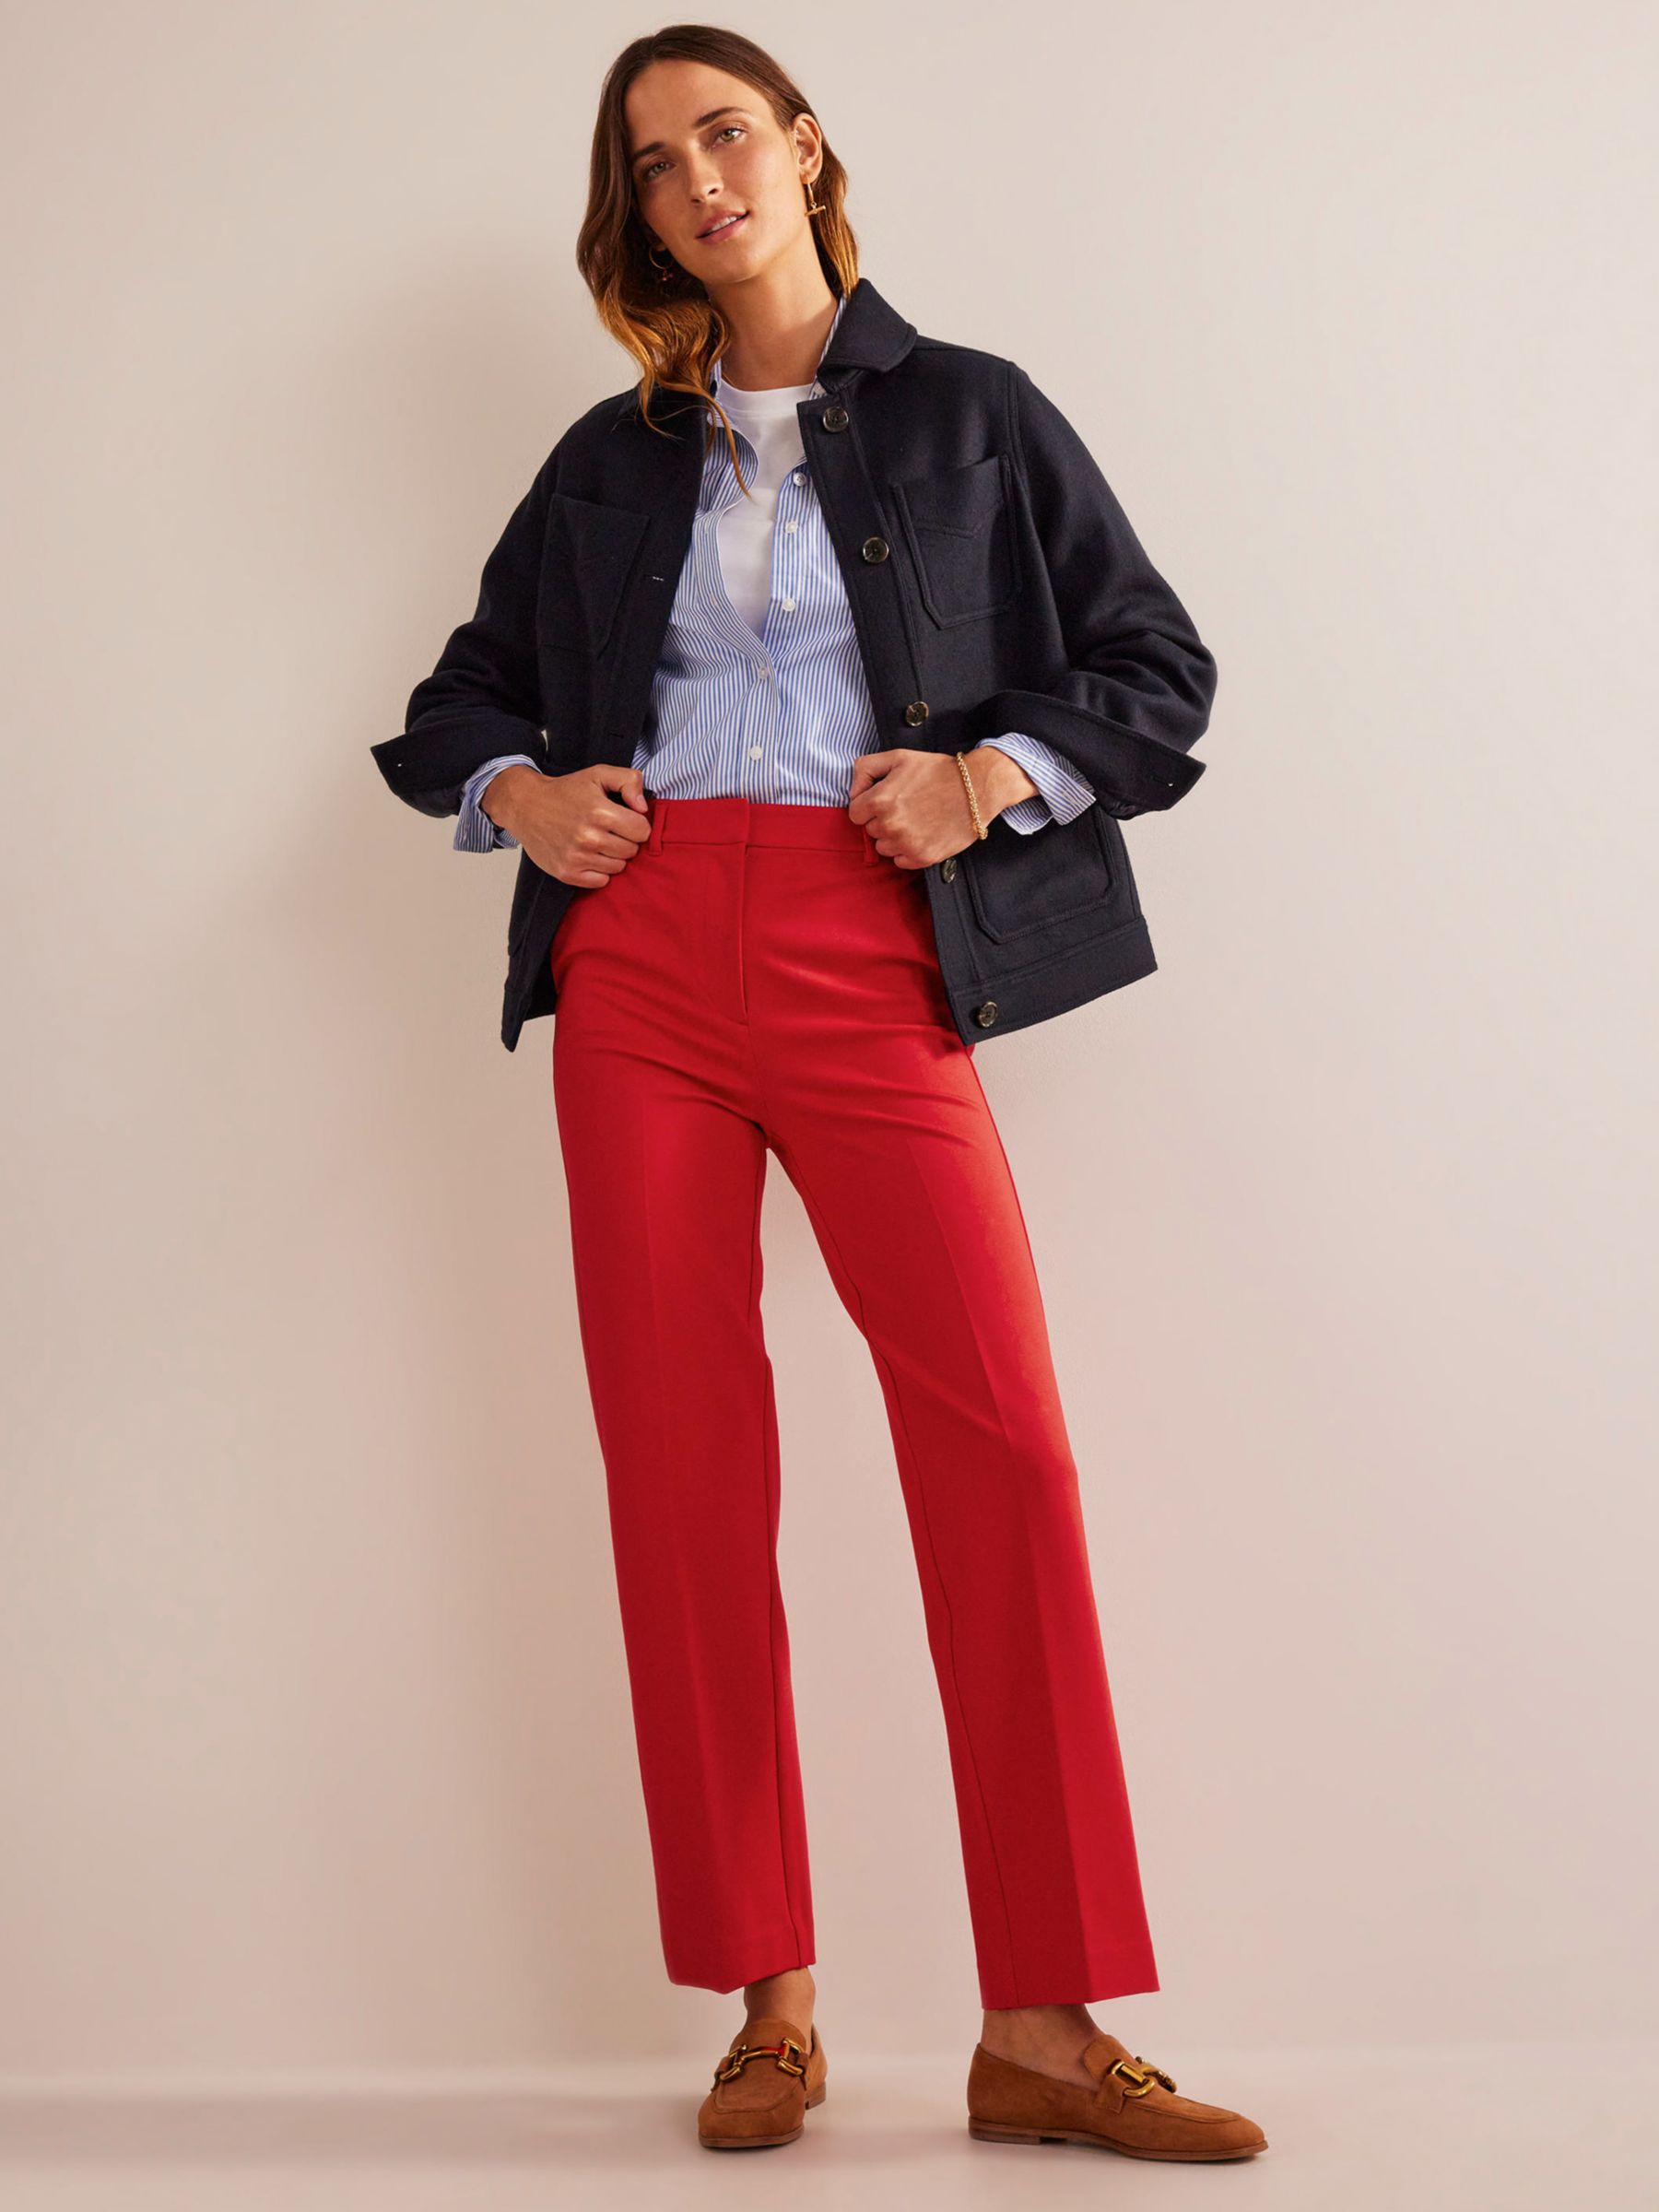 Boden Pimlico Jersey Trousers, Hot Pepper